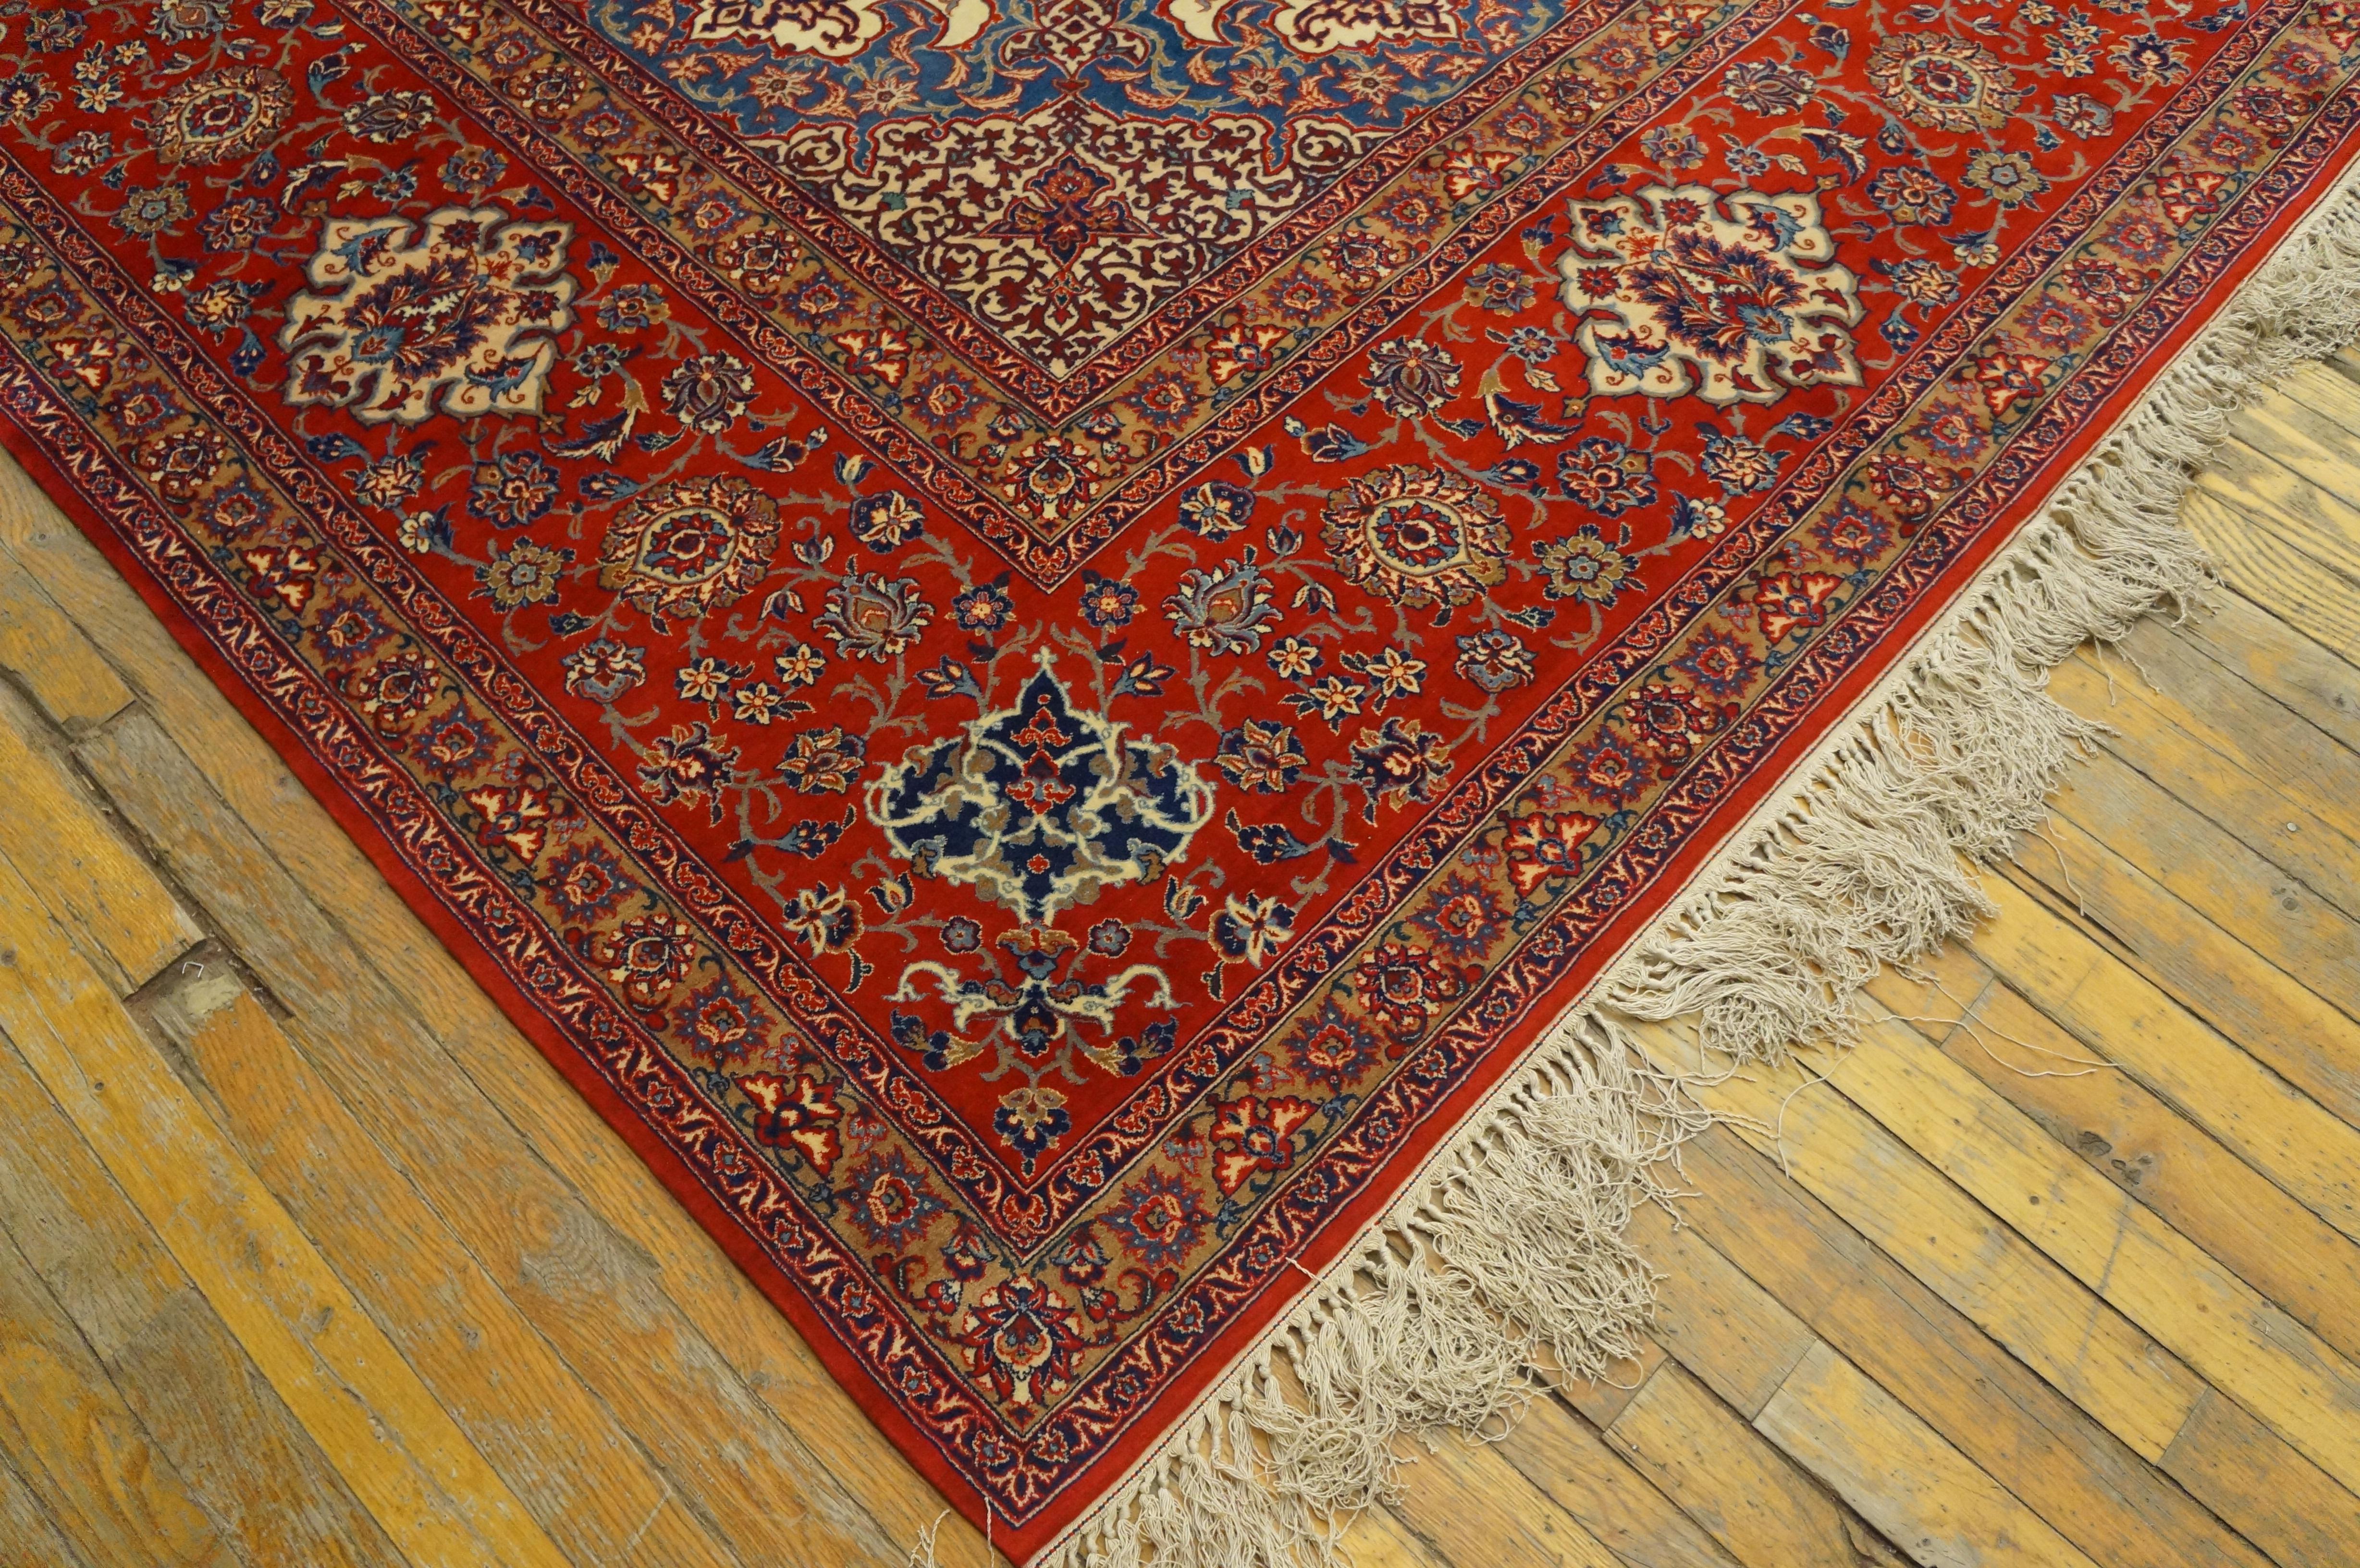 Antique Persian Isfahan rug. Measures: 9'10